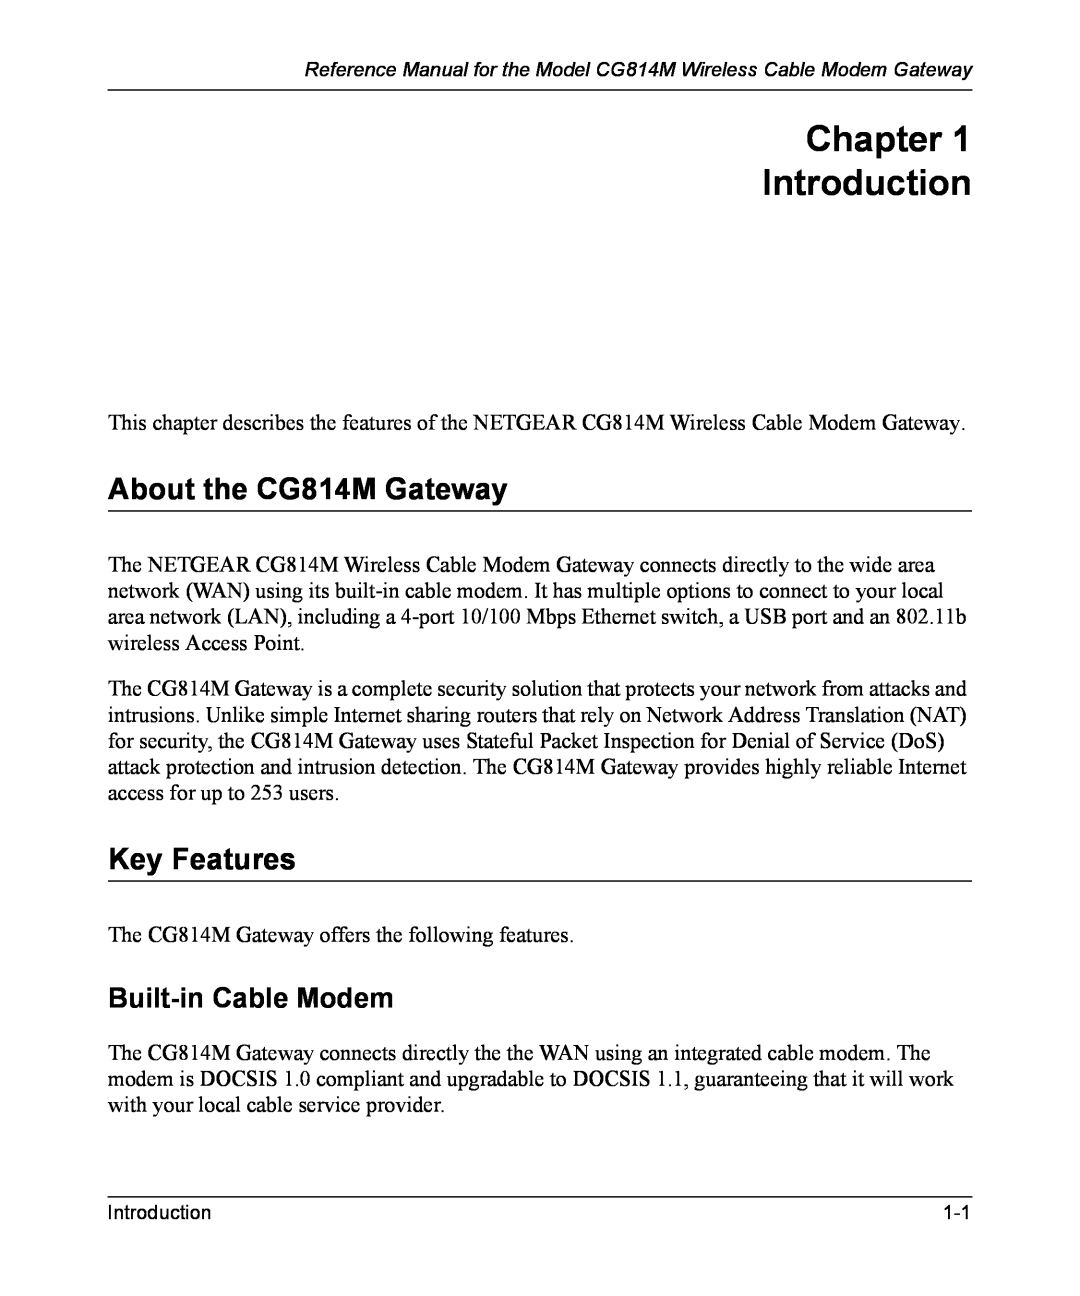 NETGEAR manual Chapter Introduction, About the CG814M Gateway, Key Features, Built-in Cable Modem 